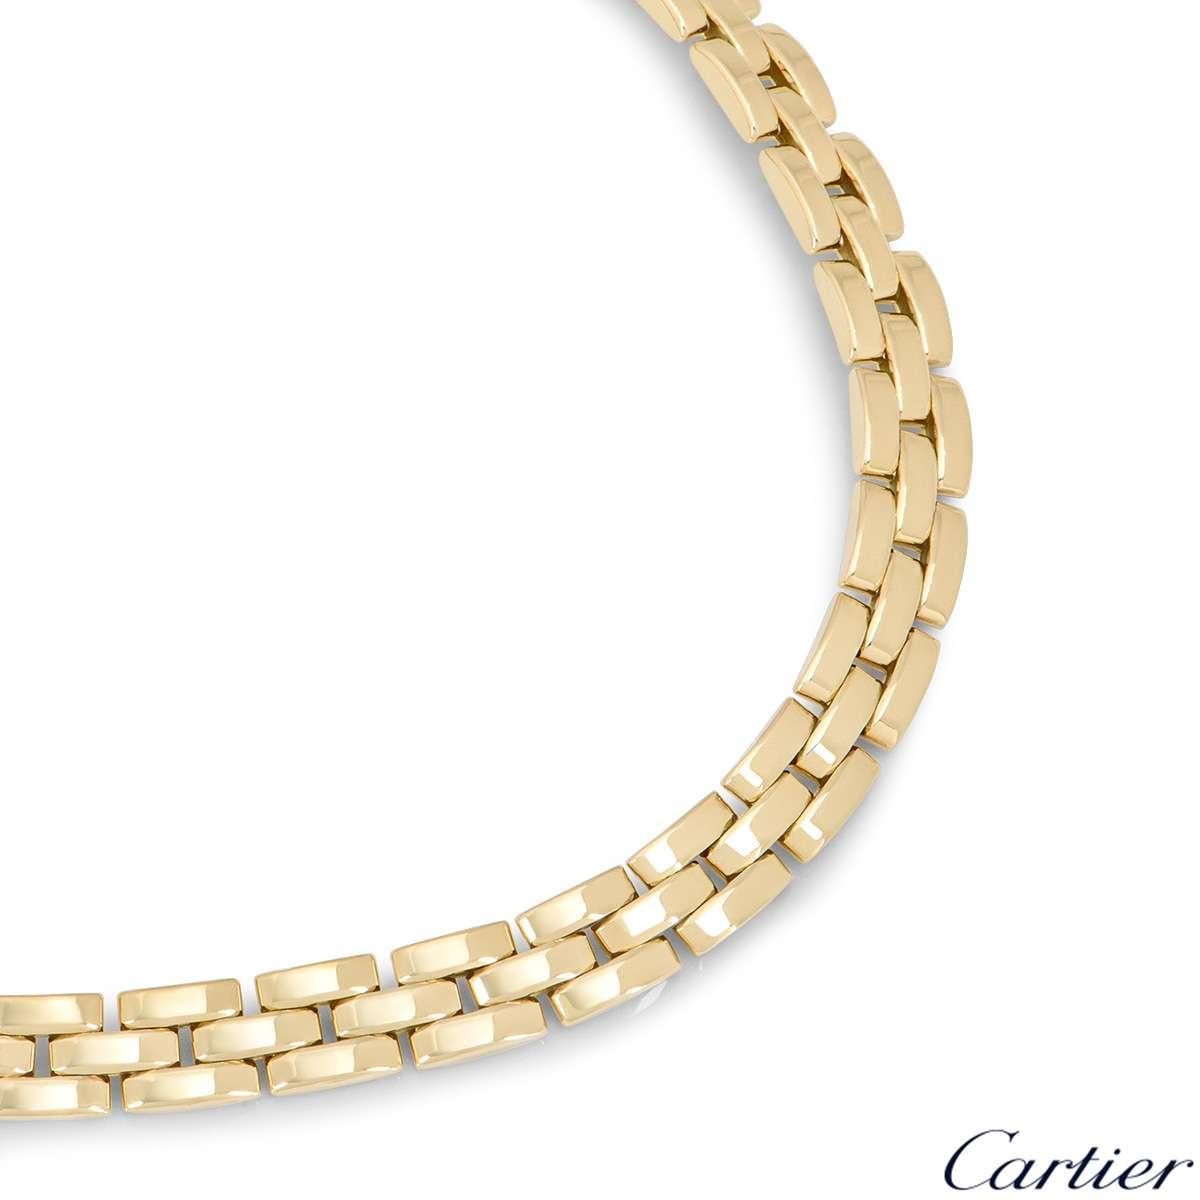 An 18k yellow gold Cartier necklace from the Maillon Panthere collection. The necklace comprises of 40 classic Cartier flat solid brick style links. The necklace measures 16 inches in length and features a box clasp with a push clasp underneath for